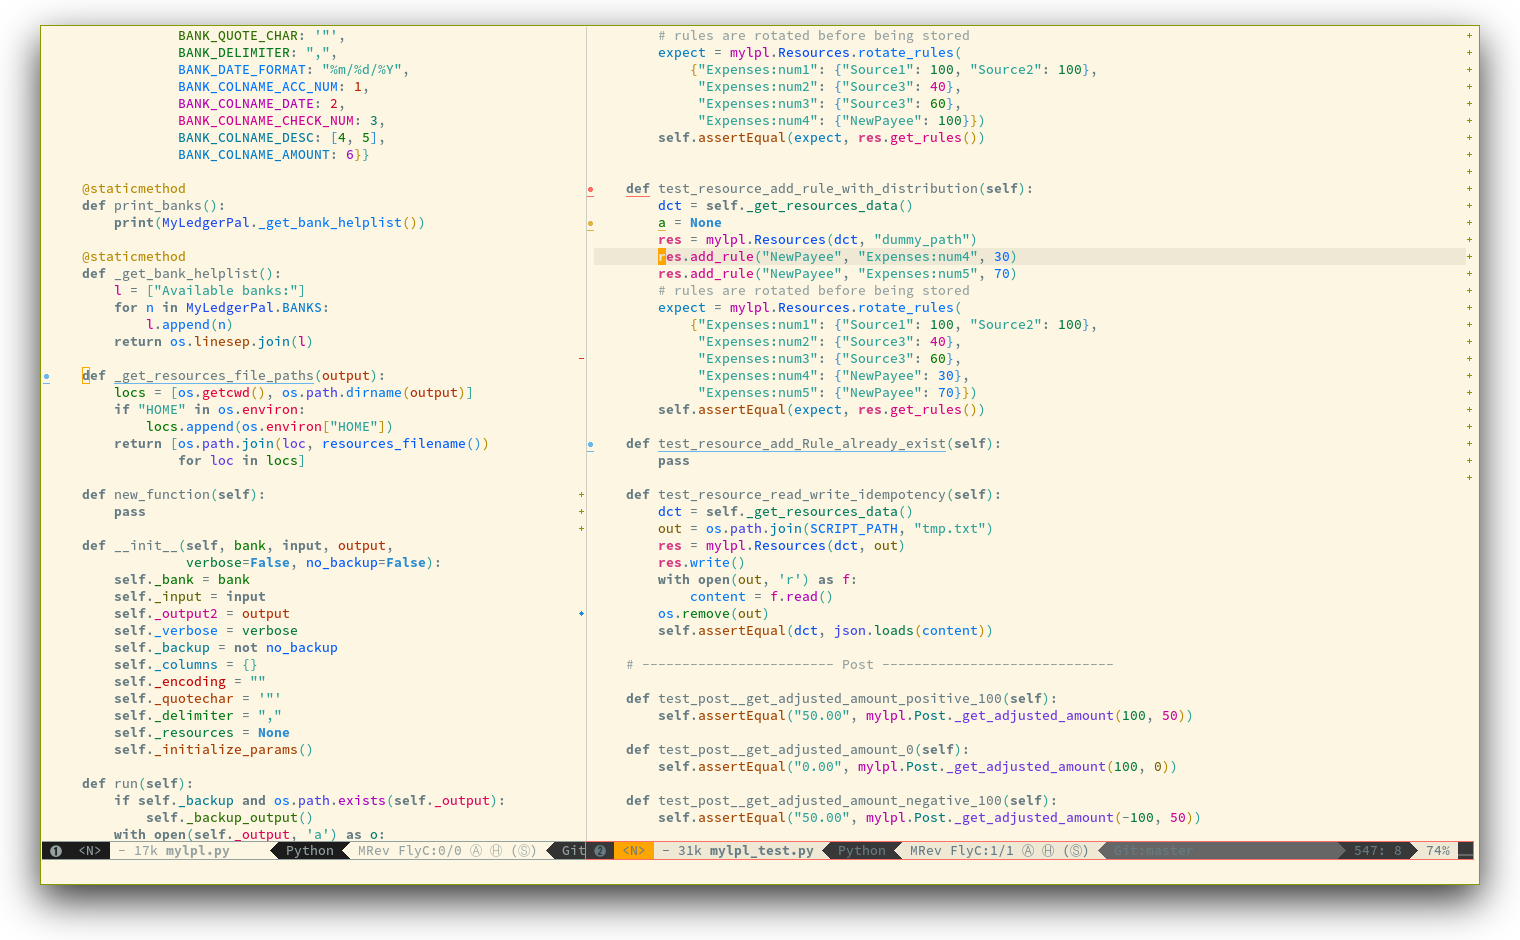 /TakeV/spacemacs/media/commit/2d17a08138d9fdab01ae8bfbbaabffa7be6a40d7/layers/colors/img/theme-tweaks-python.png